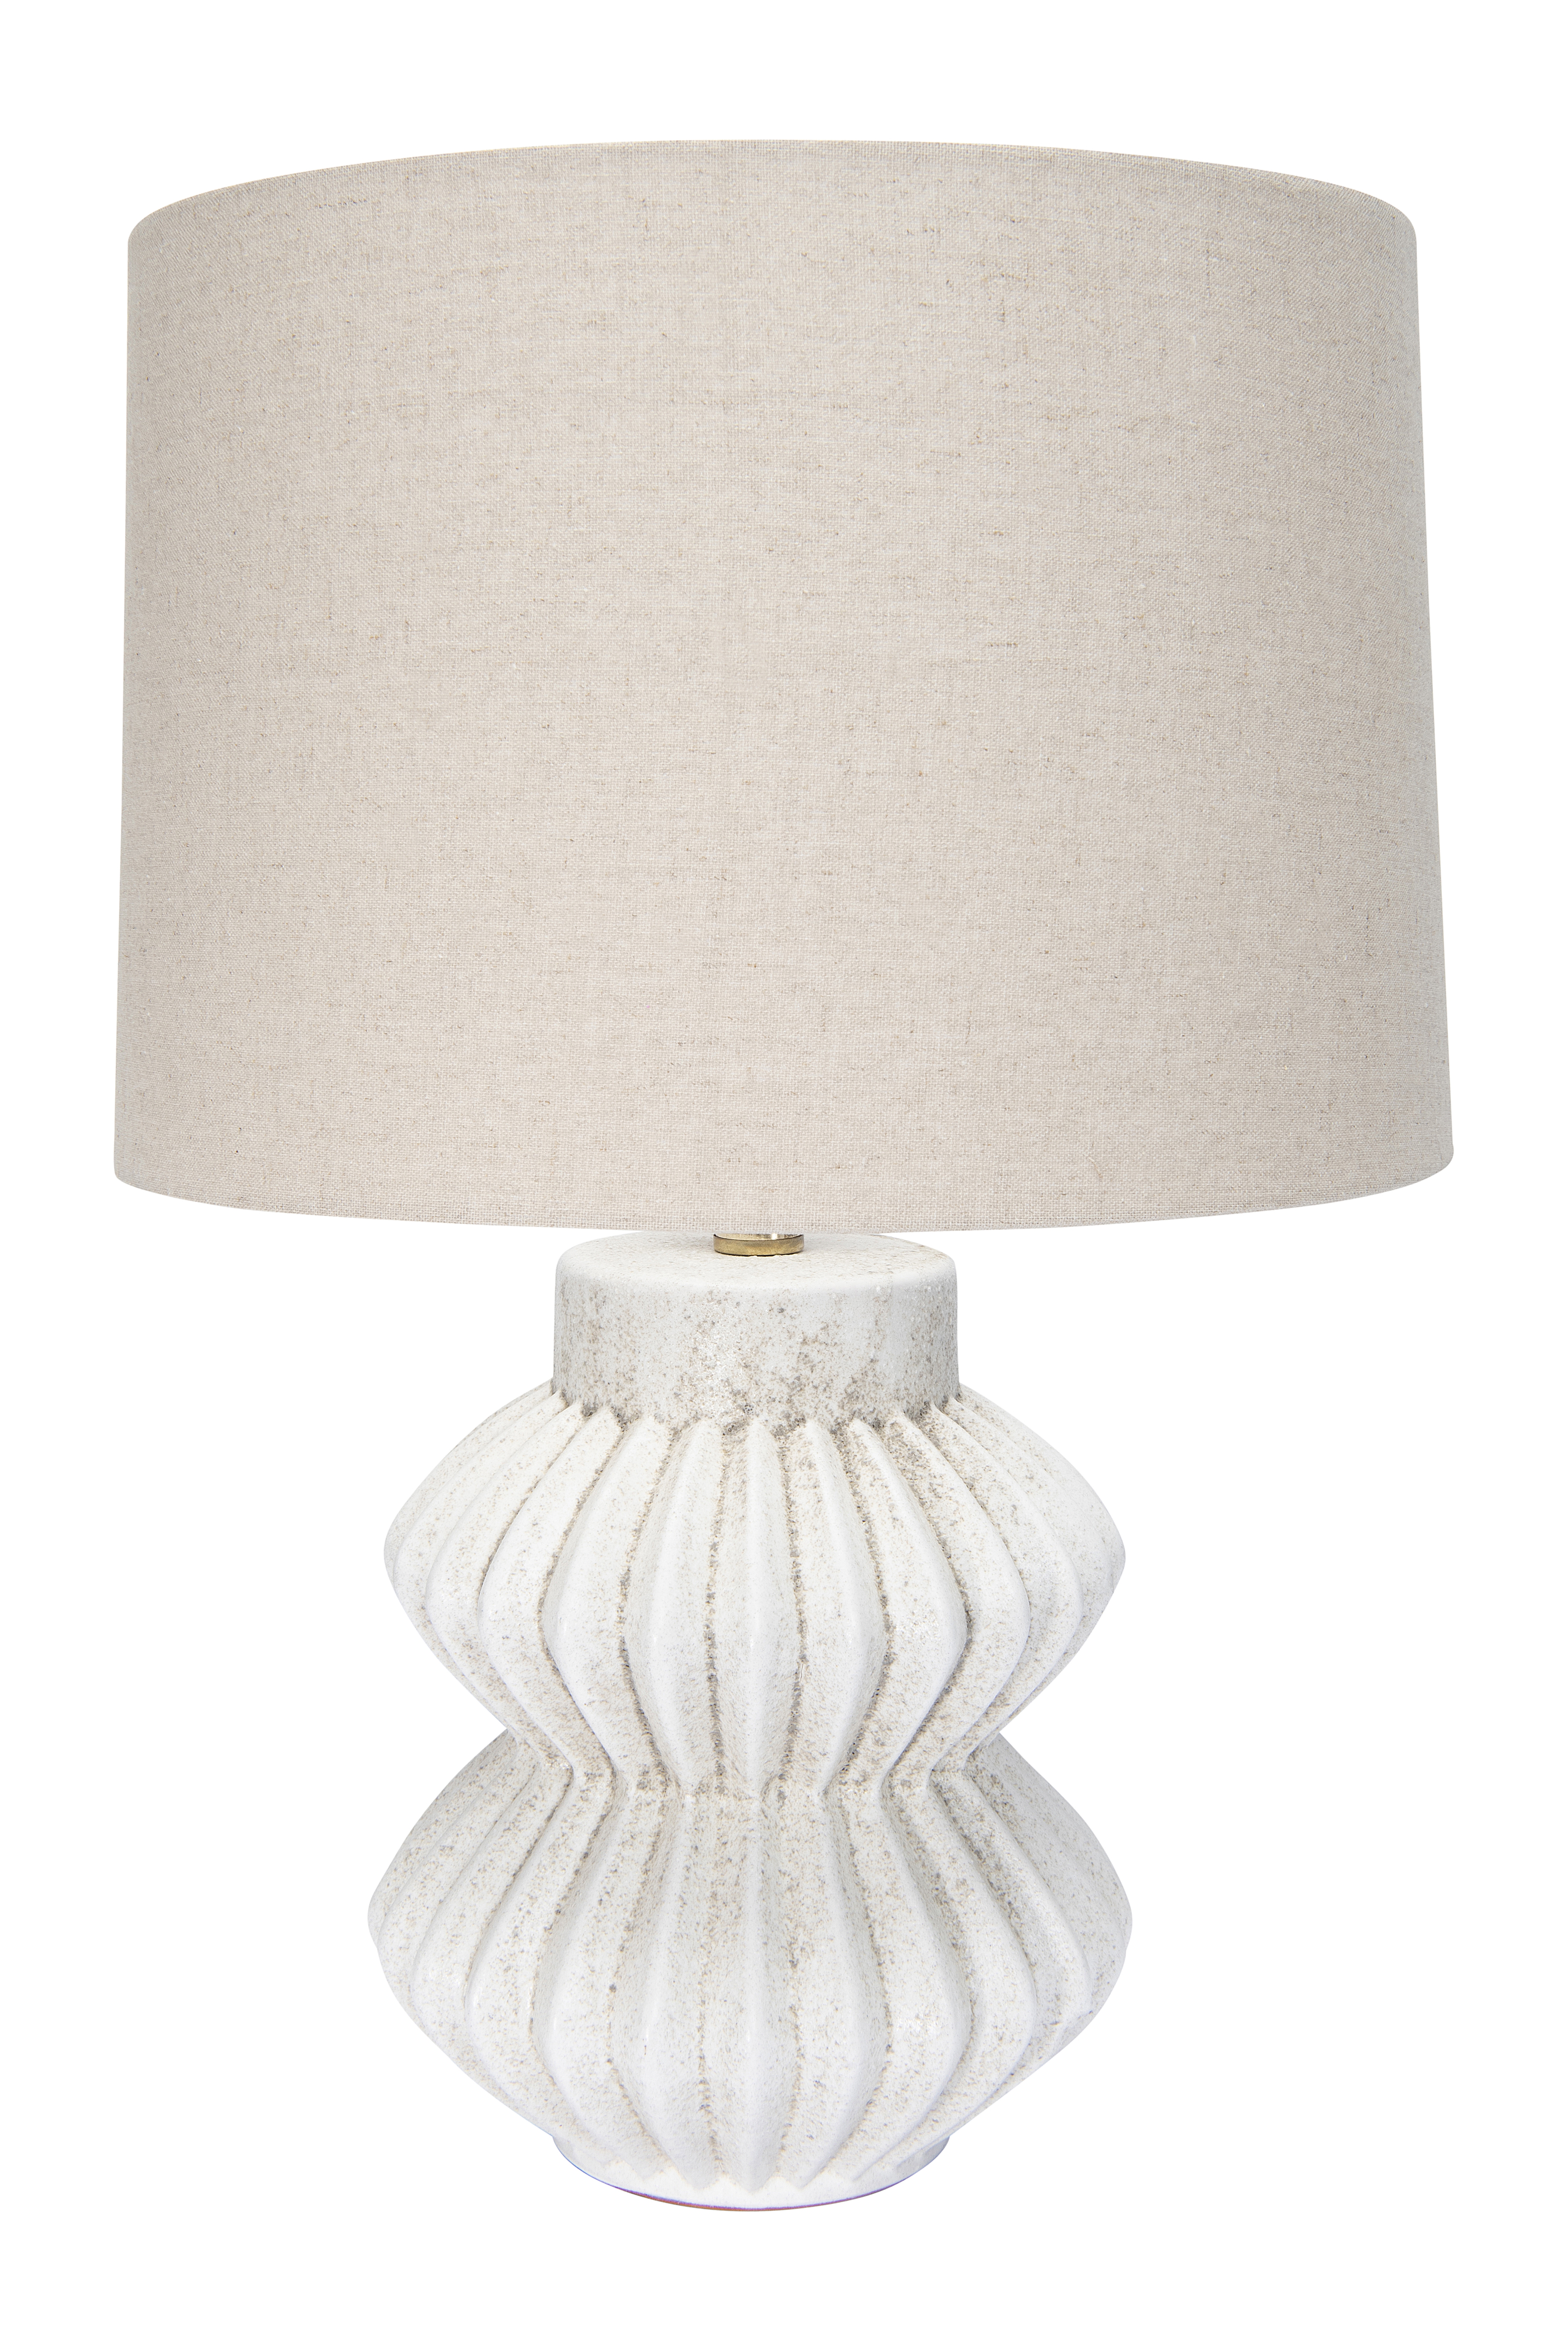 22"H Fluted Terracotta Table Lamp with Distressed Finish & Linen Shade - Image 0